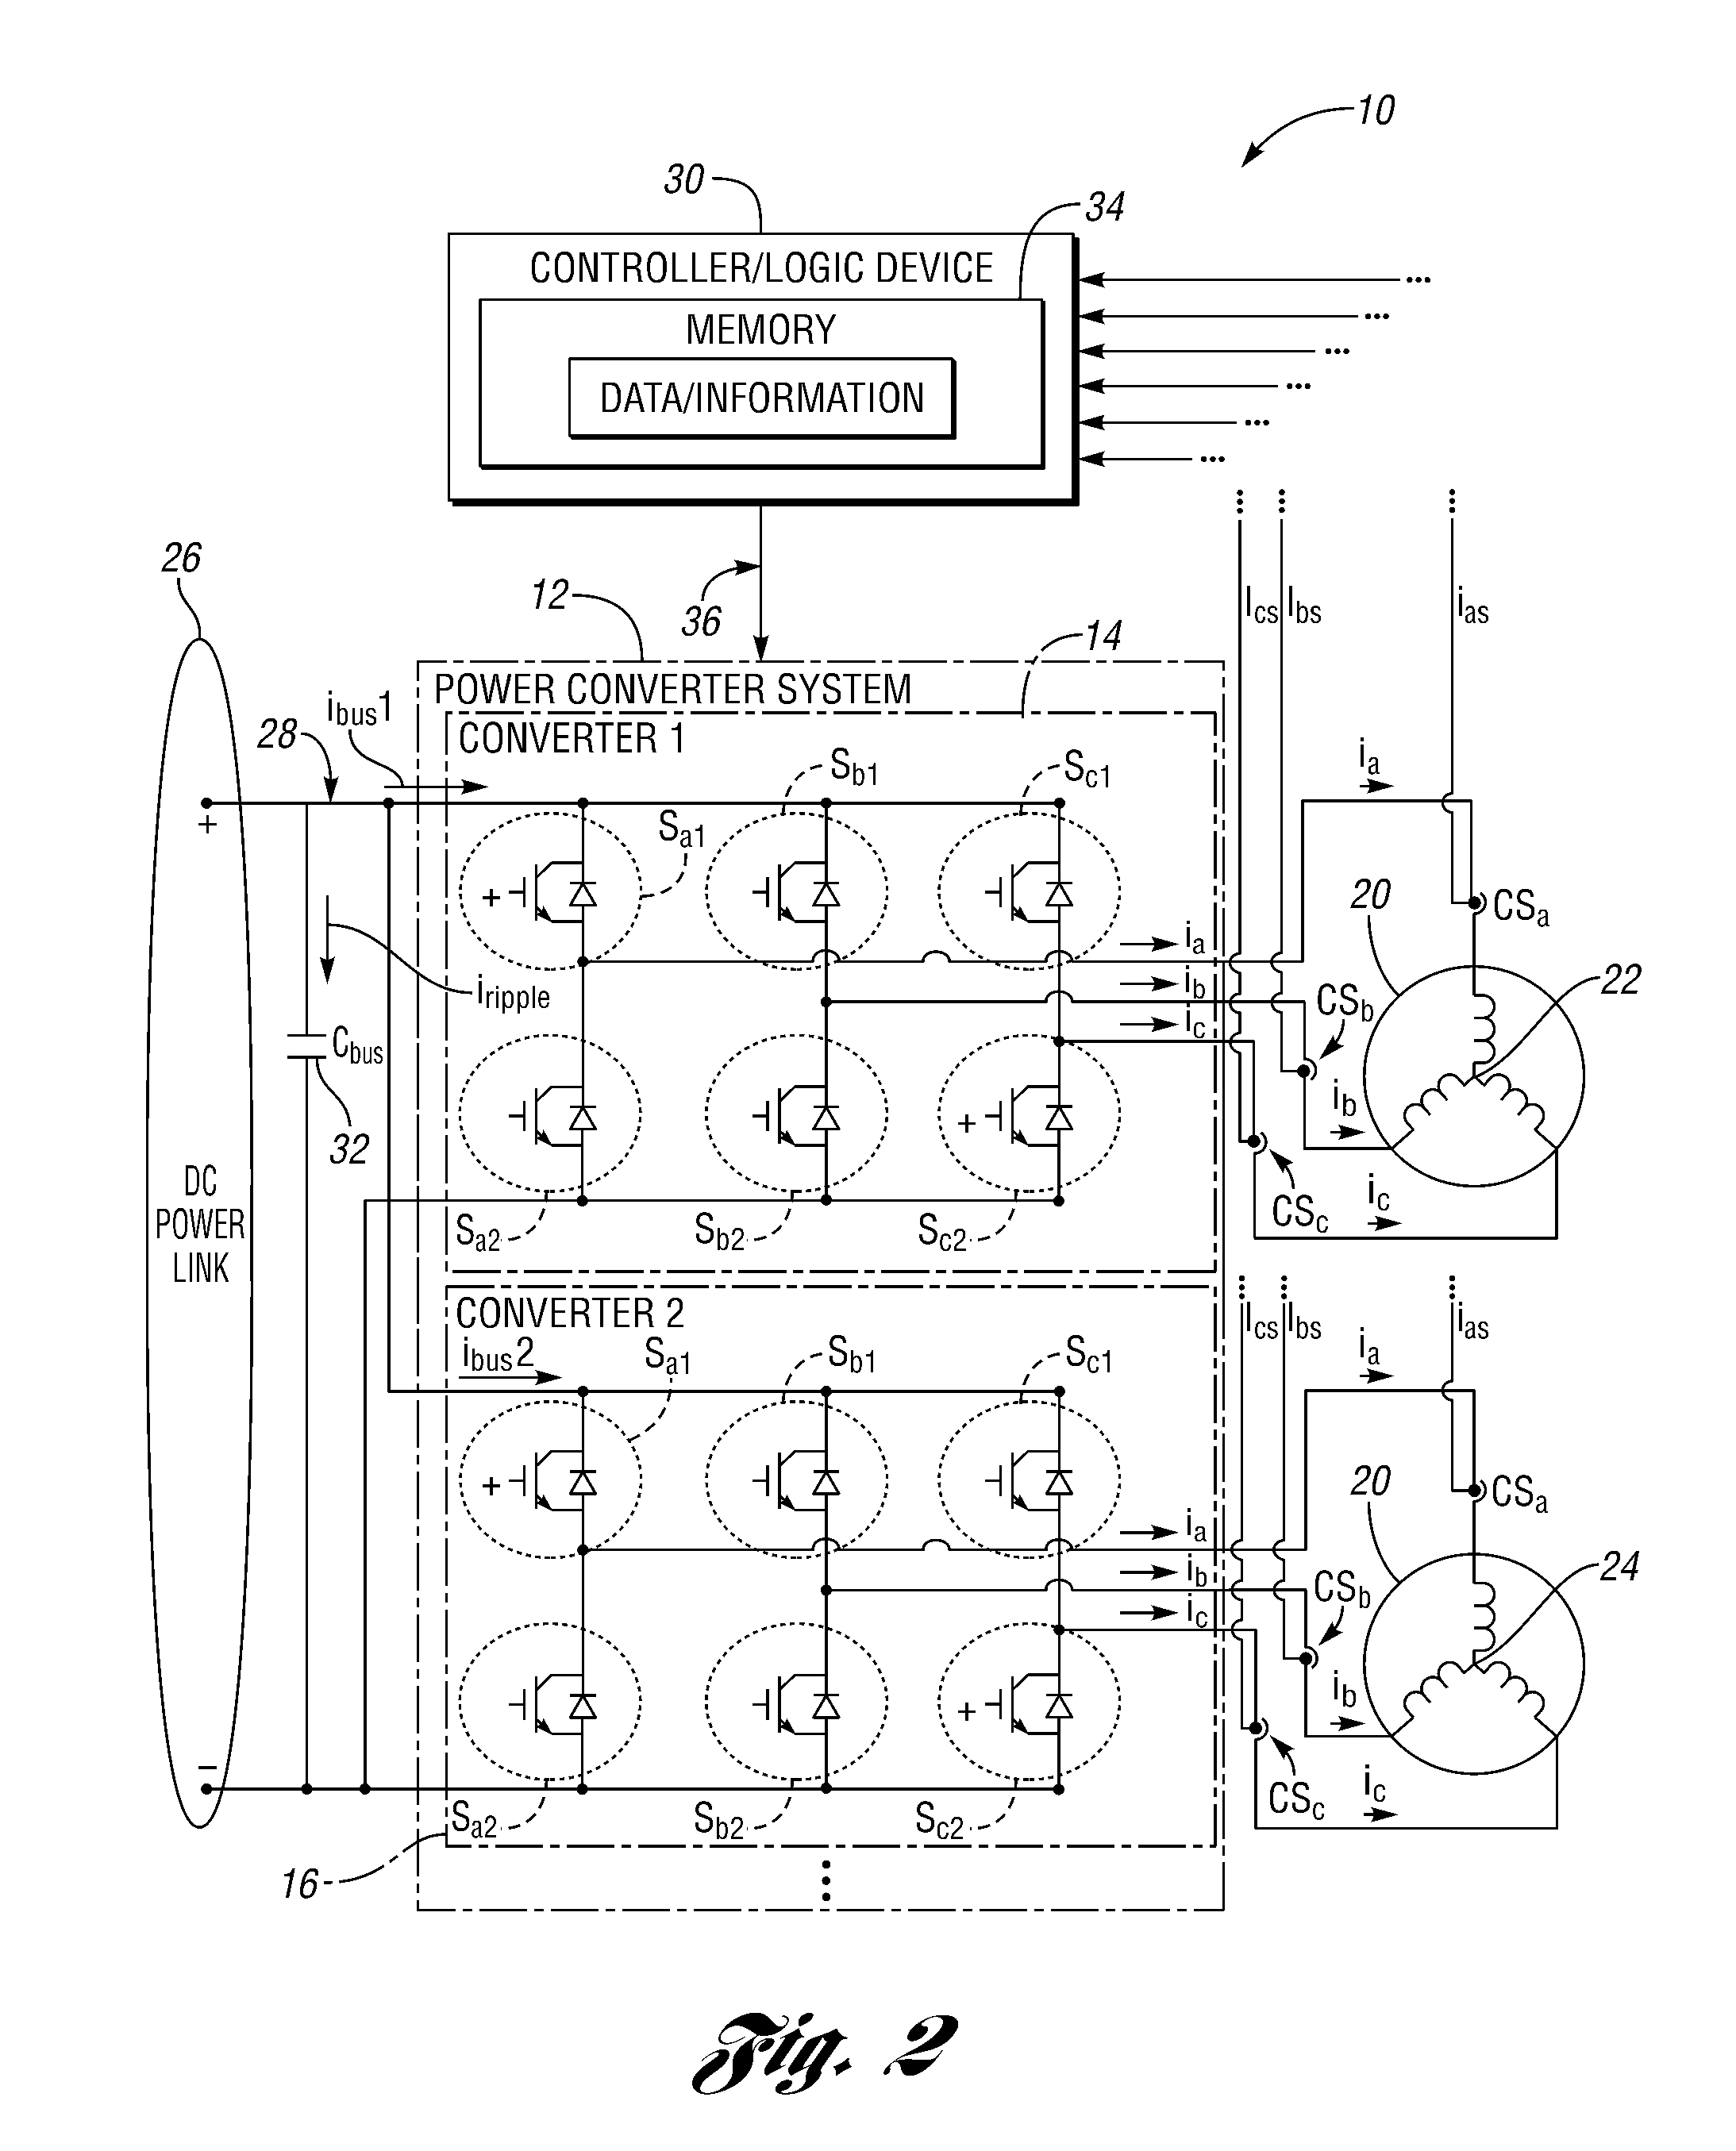 Method And System For Controlling A Power Converter System Connected To A DC-Bus Capacitor